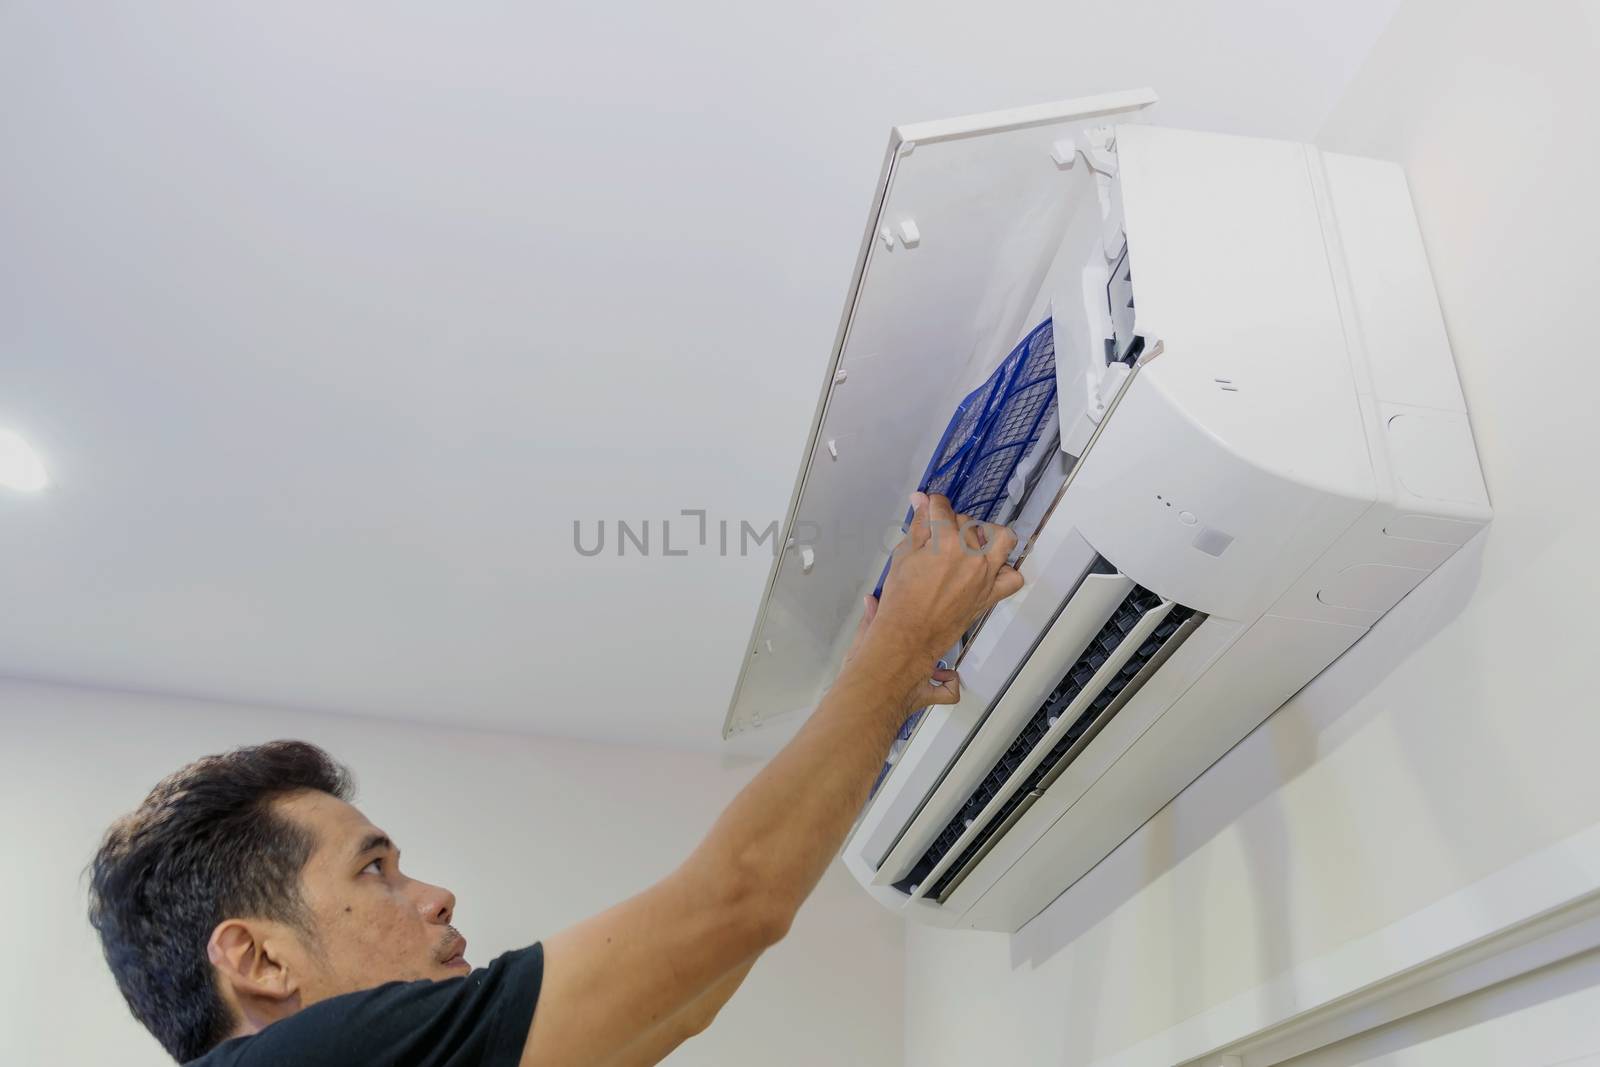 A man is removing the air filter of the air conditioner for cleaning.